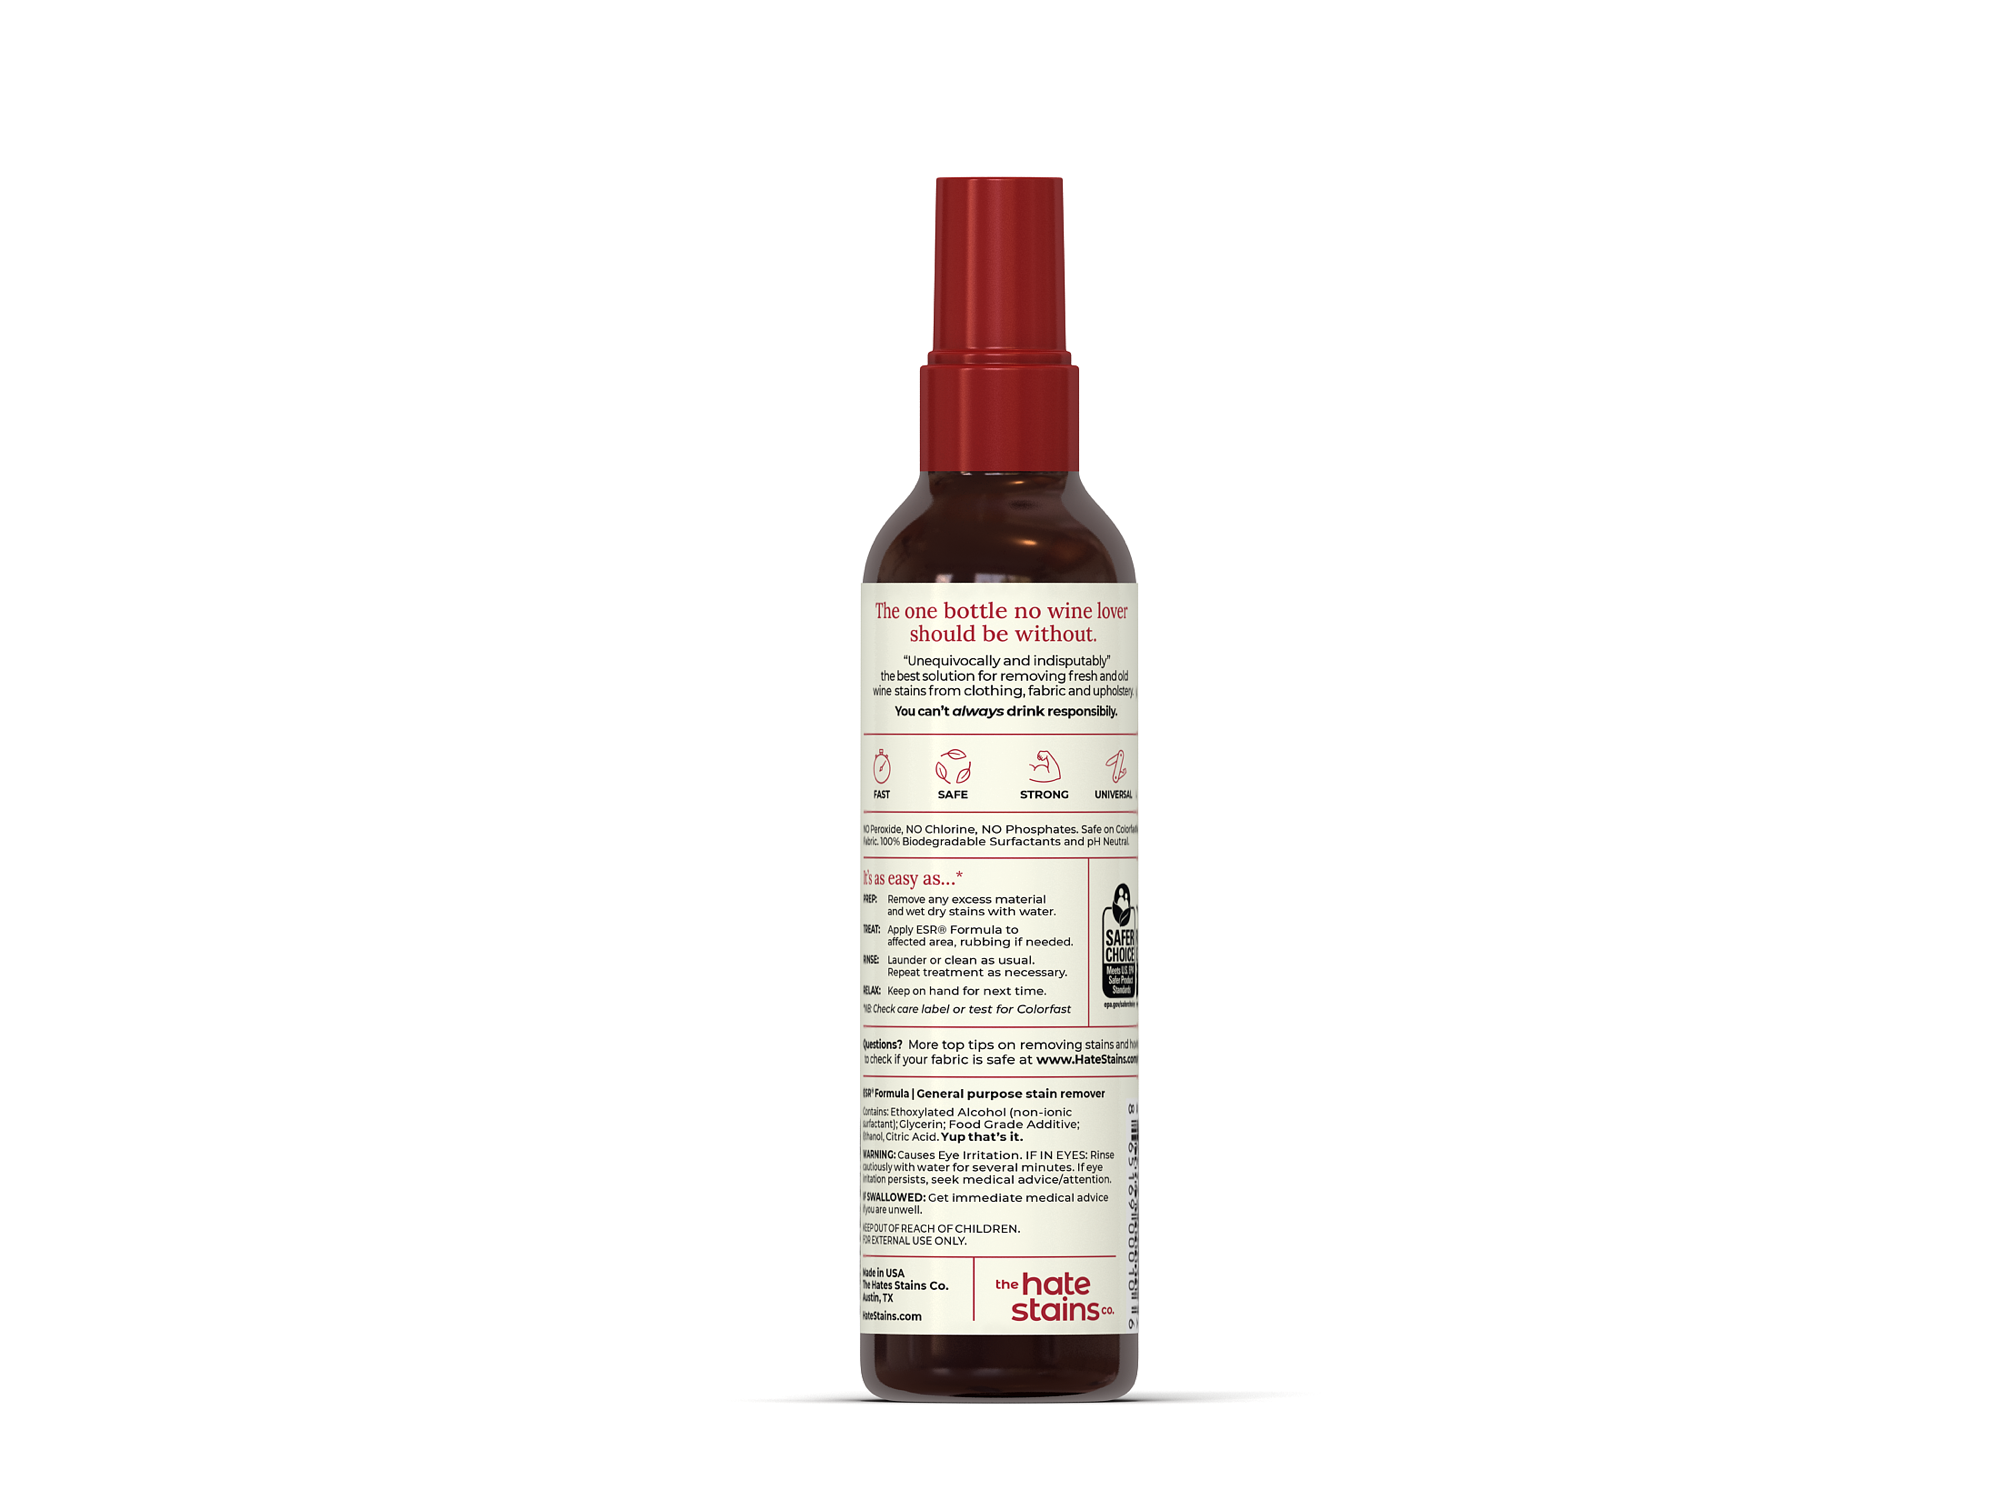 Chateau Spill Red Wine Stain Remover 4oz Bottle - The Hate Stains Co.